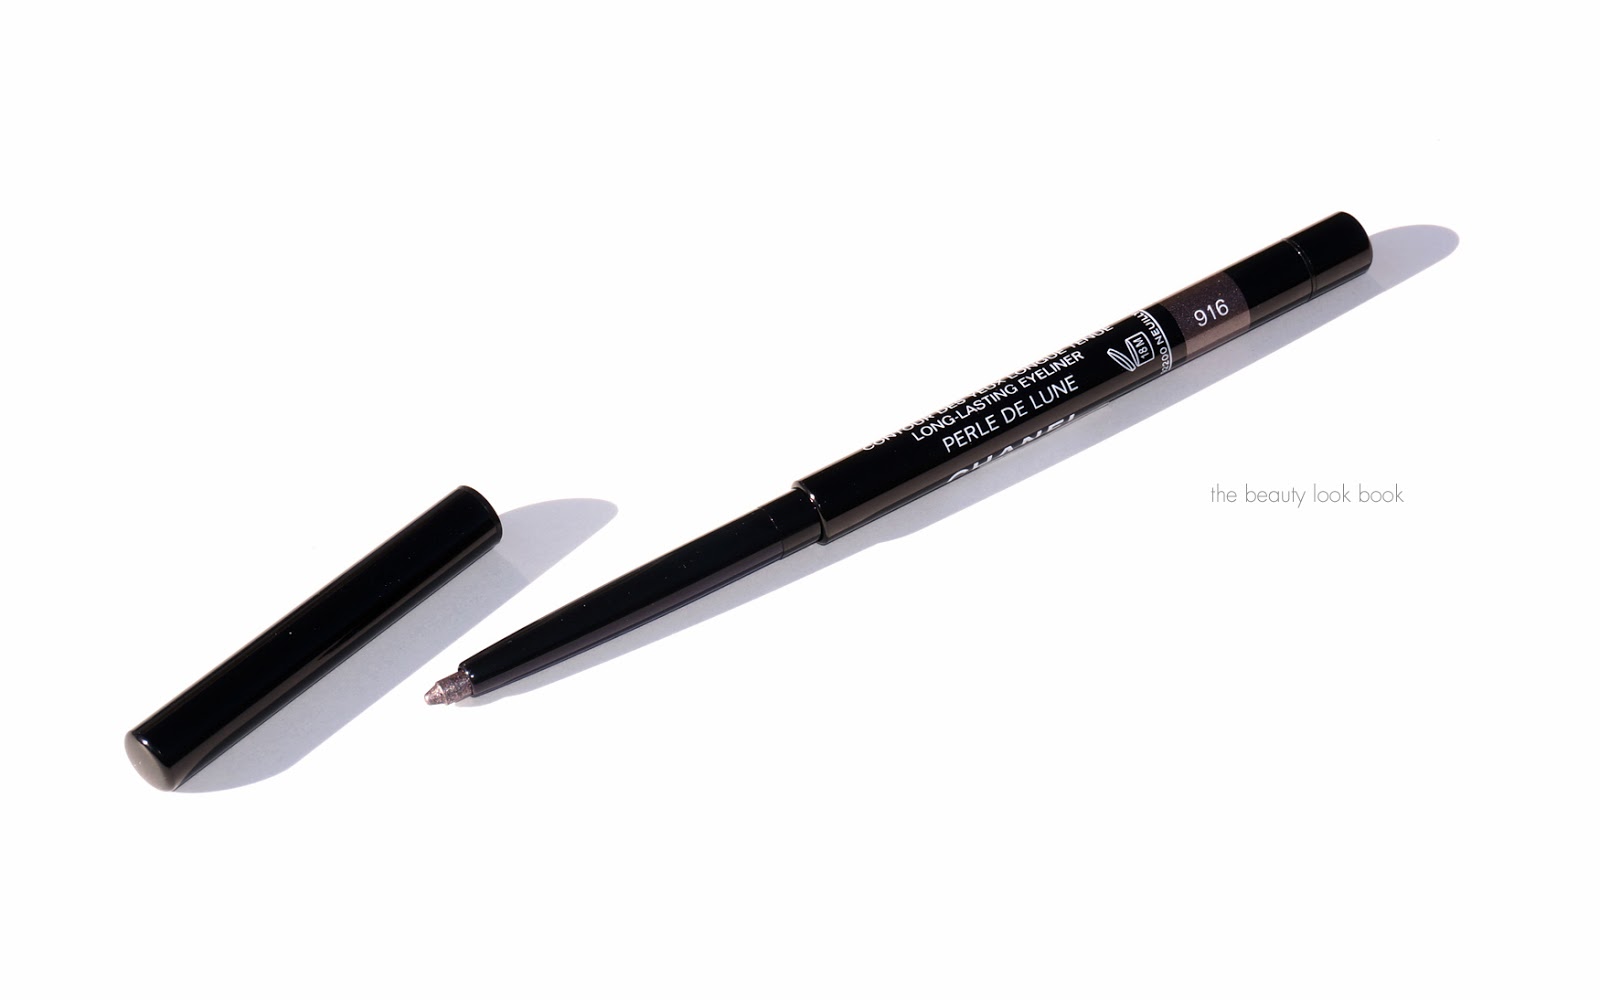 STYLO YEUX WATERPROOF Long-Lasting Eyeliner by CHANEL at ORCHARD MILE